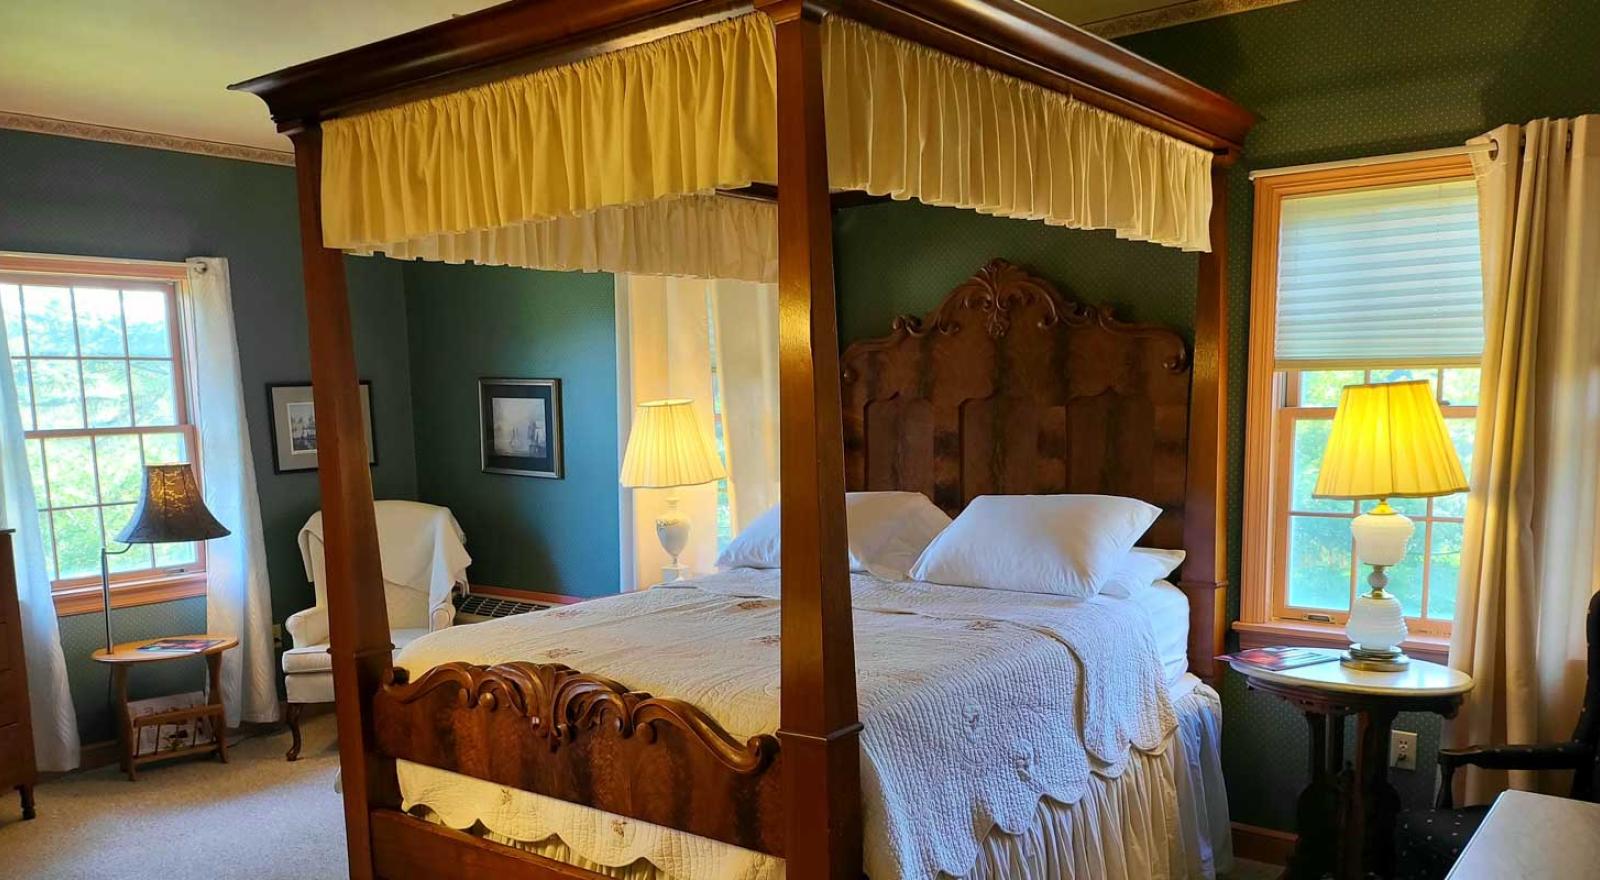 1 Queen mid-19th century bed and furnishings. Includes private bath.